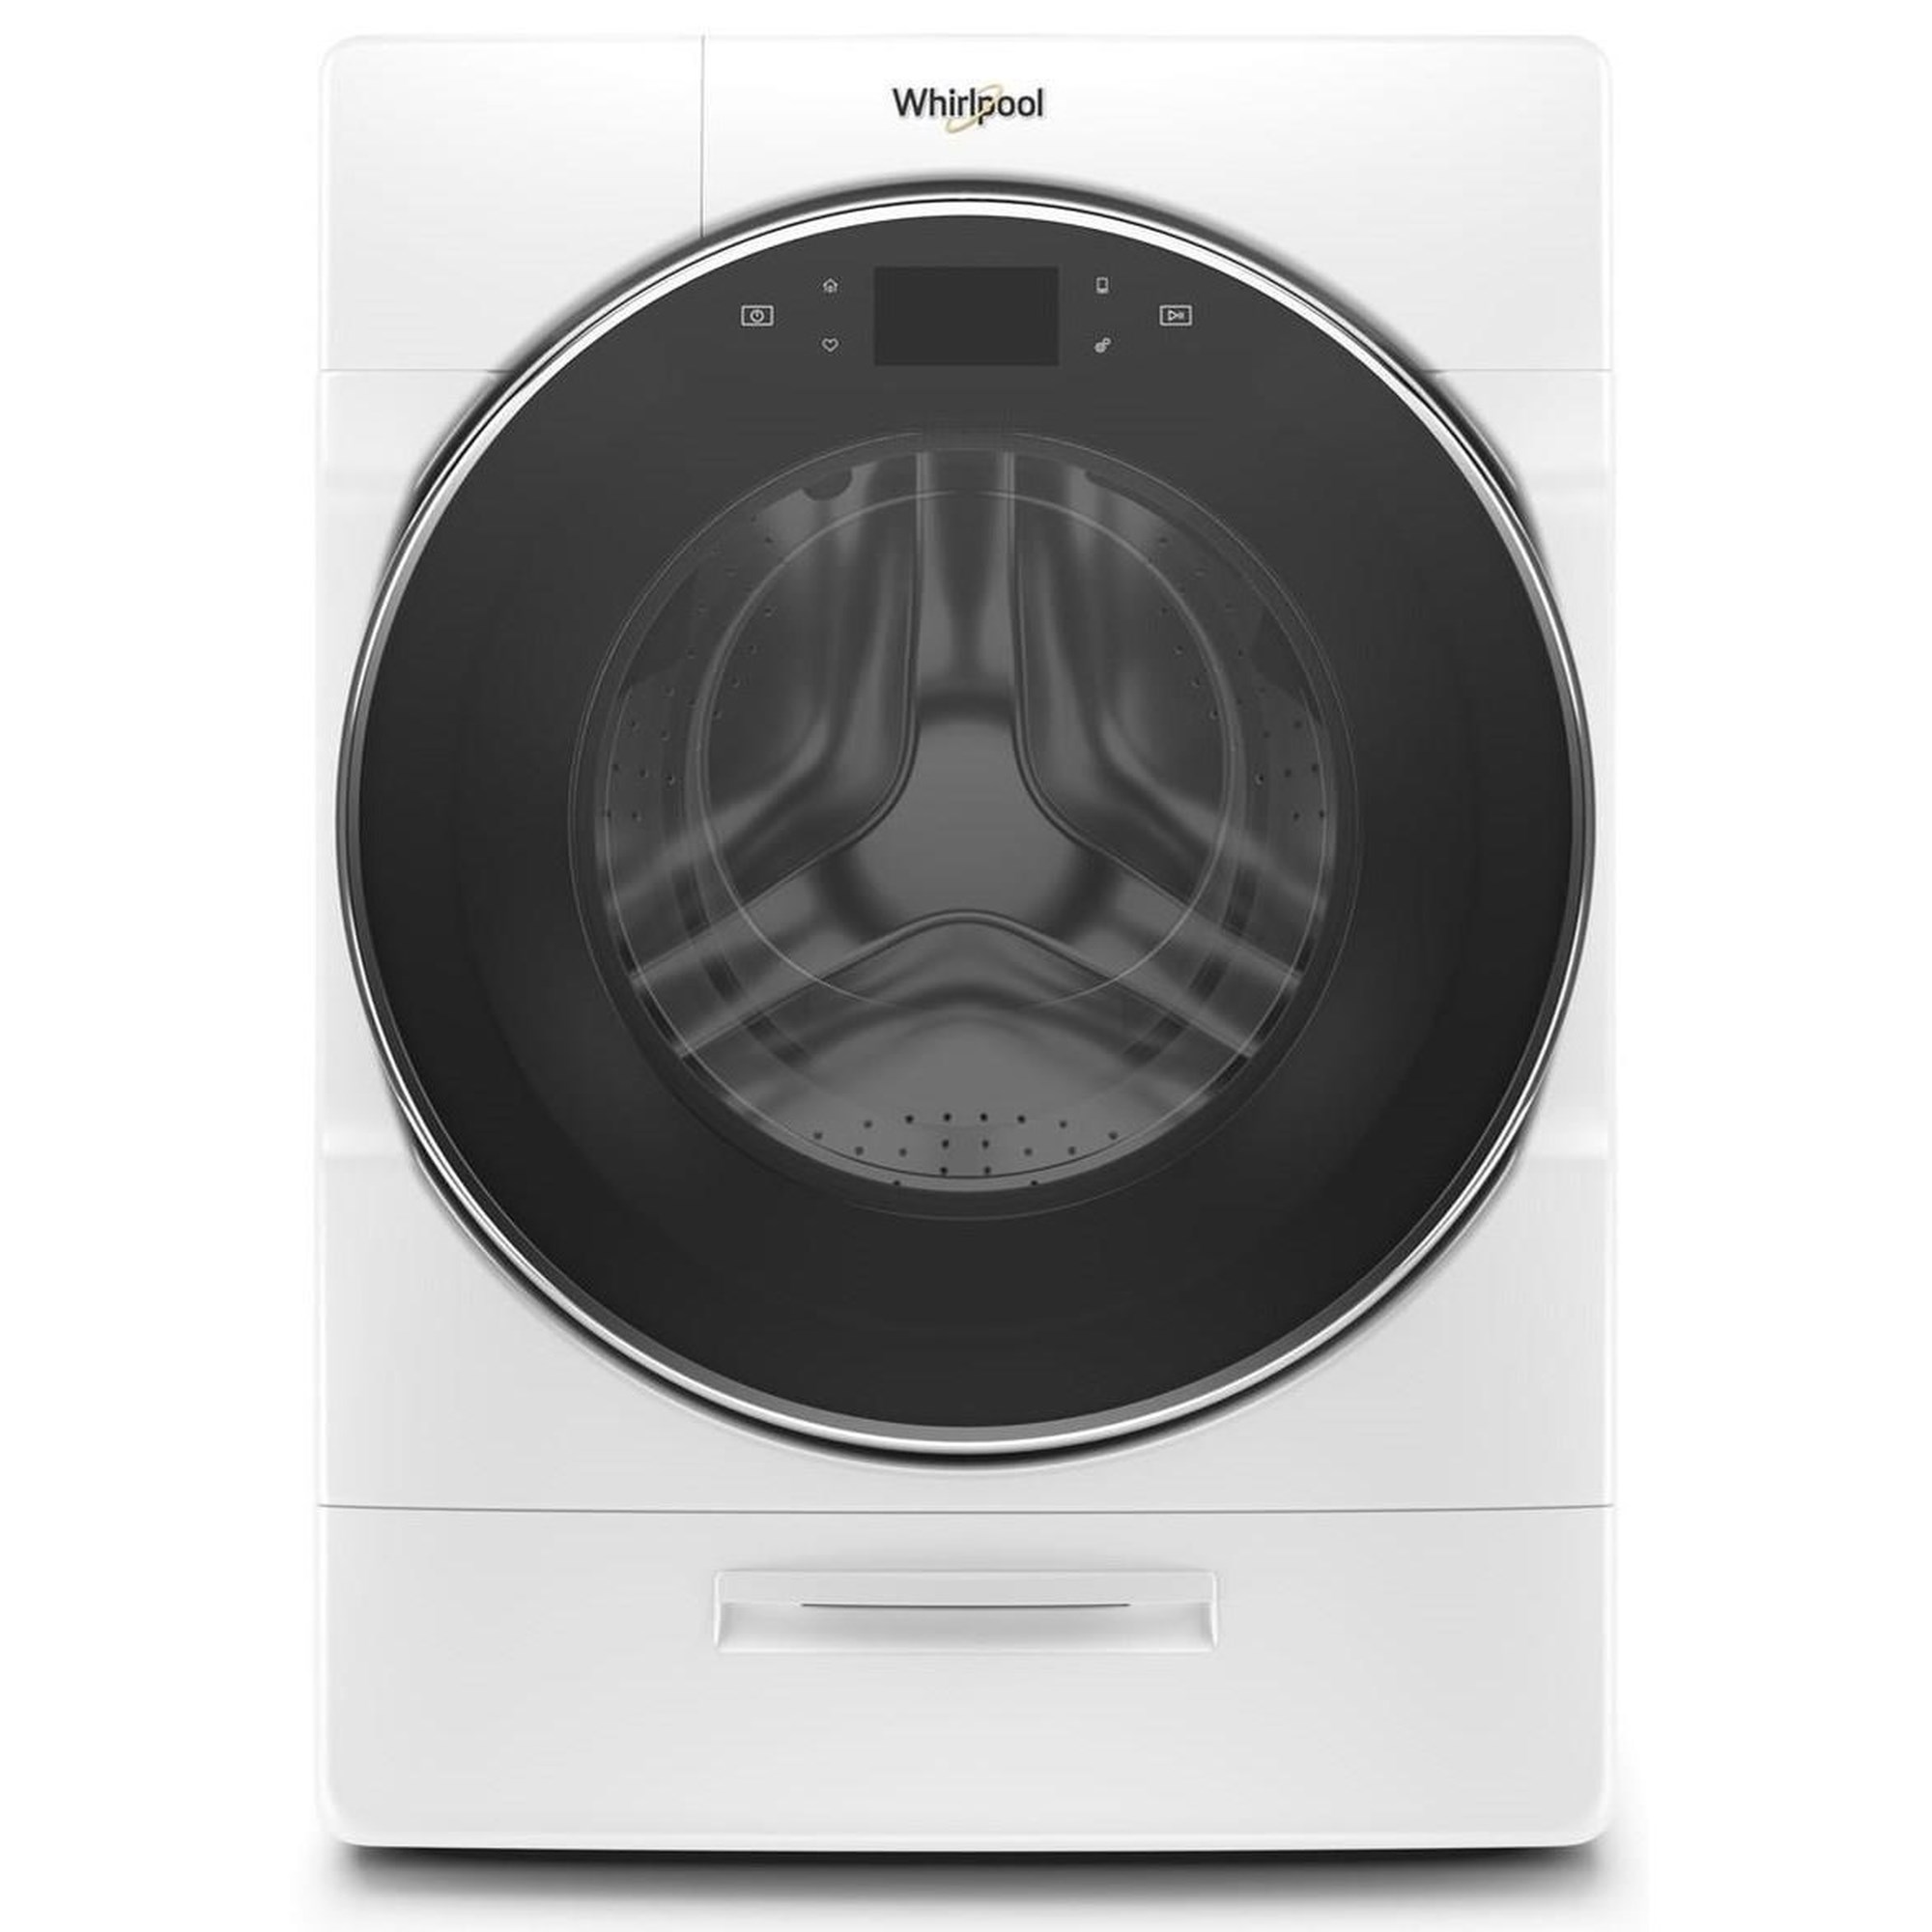 WFW5090JW by Whirlpool - 2.3 cu. ft. 24 Compact Washer with